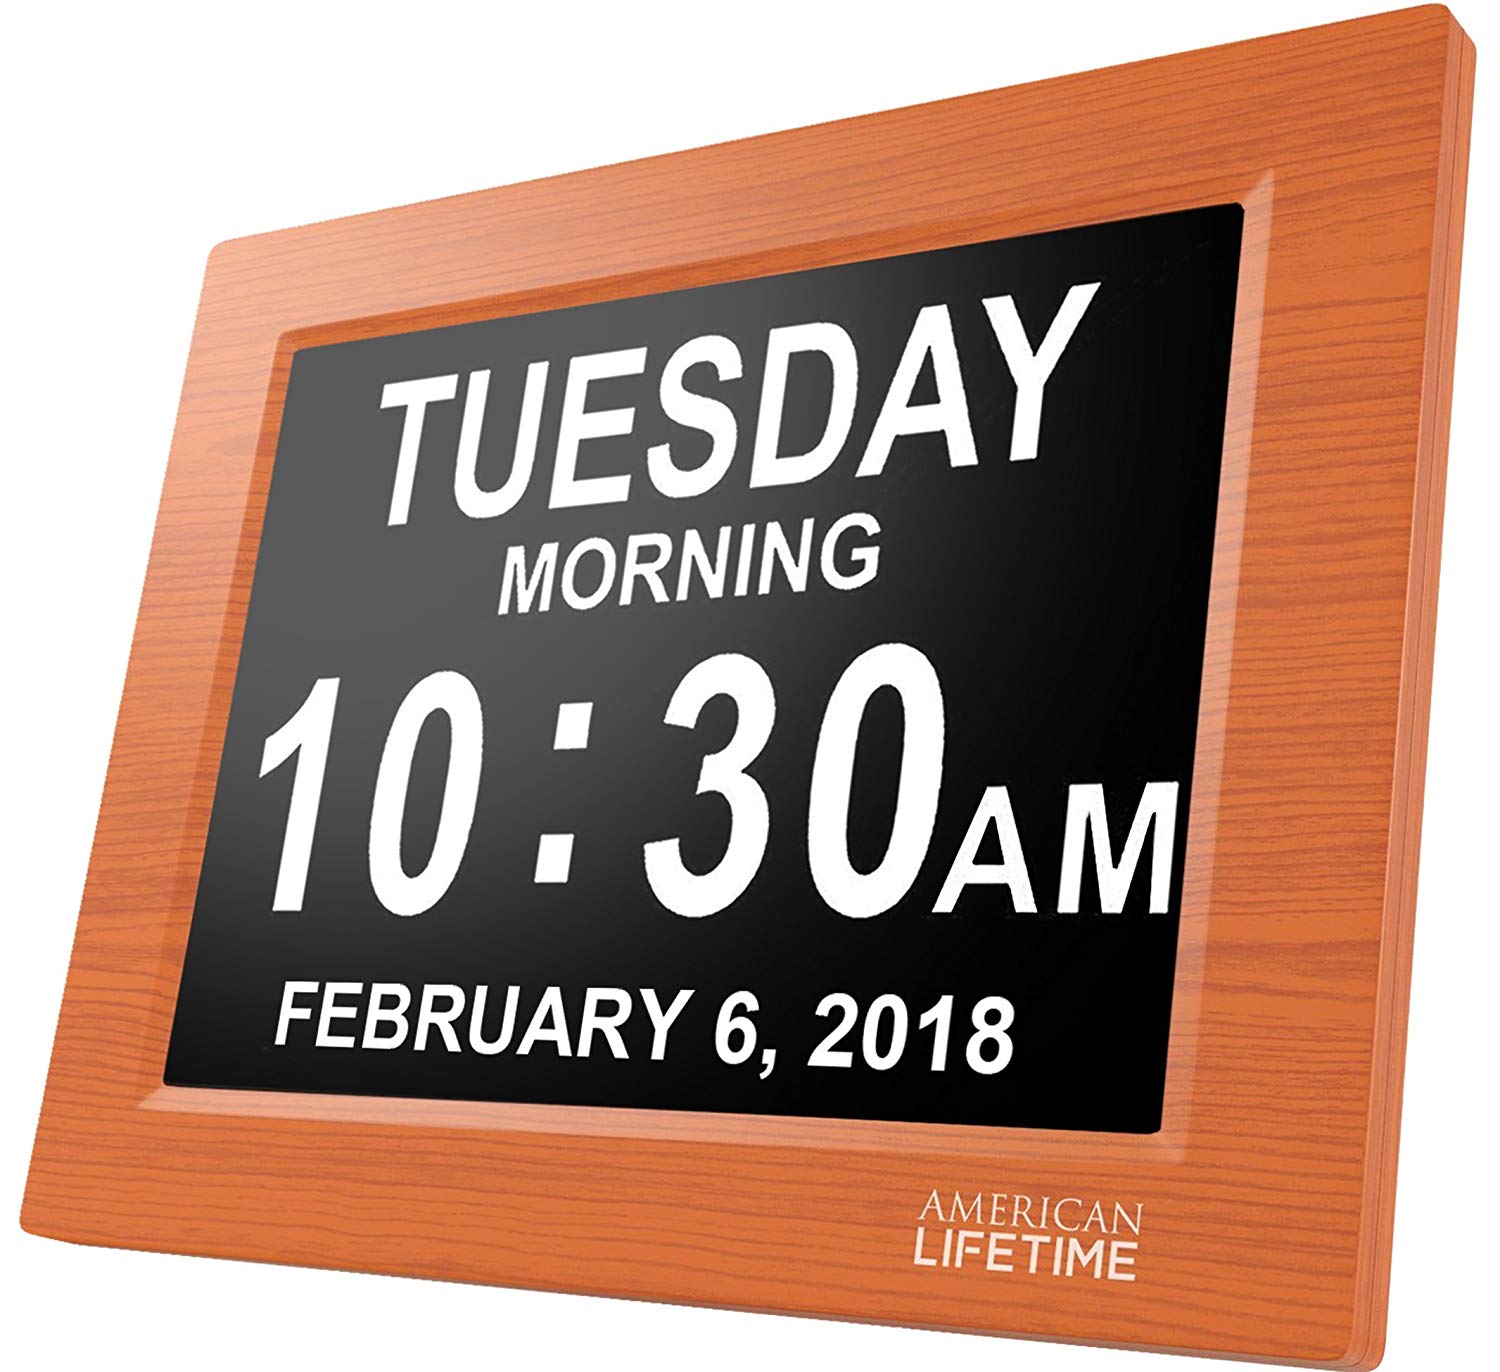 American Lifetime [Newest Version] Day Clock - Extra Large Impaired Vision Digital Clock with Battery Backup & 5 Alarm Options (Brown Wood Color)